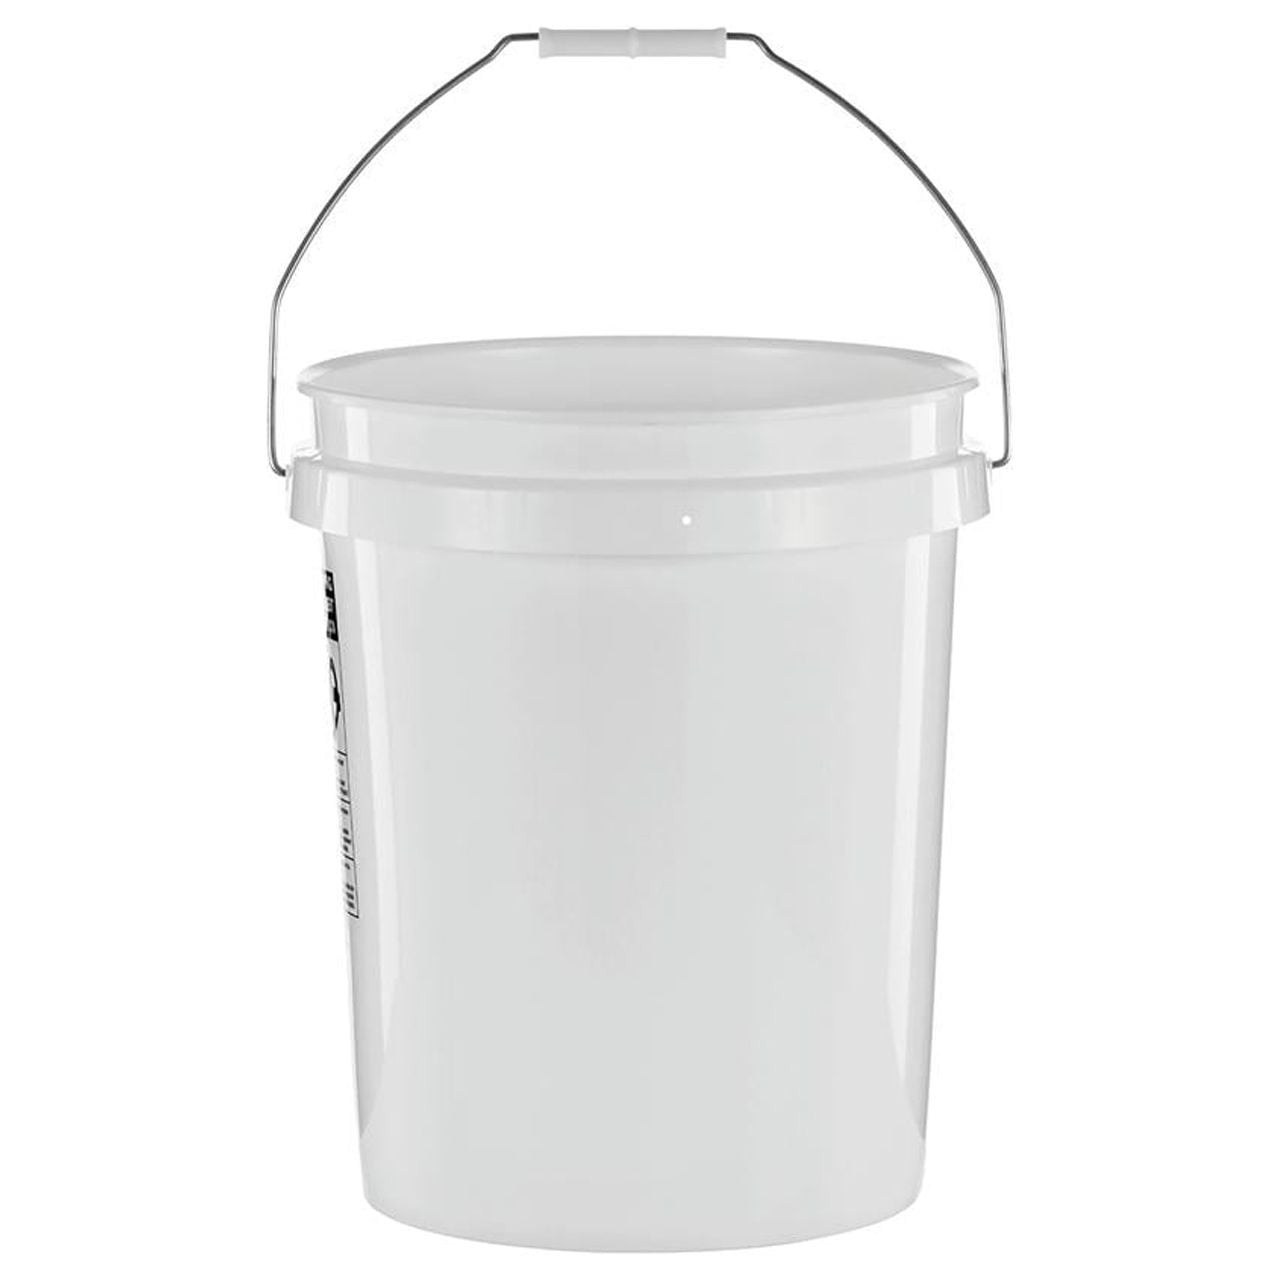 5 Gallon Food Grade Bucket with Lid, White (3-Pack)